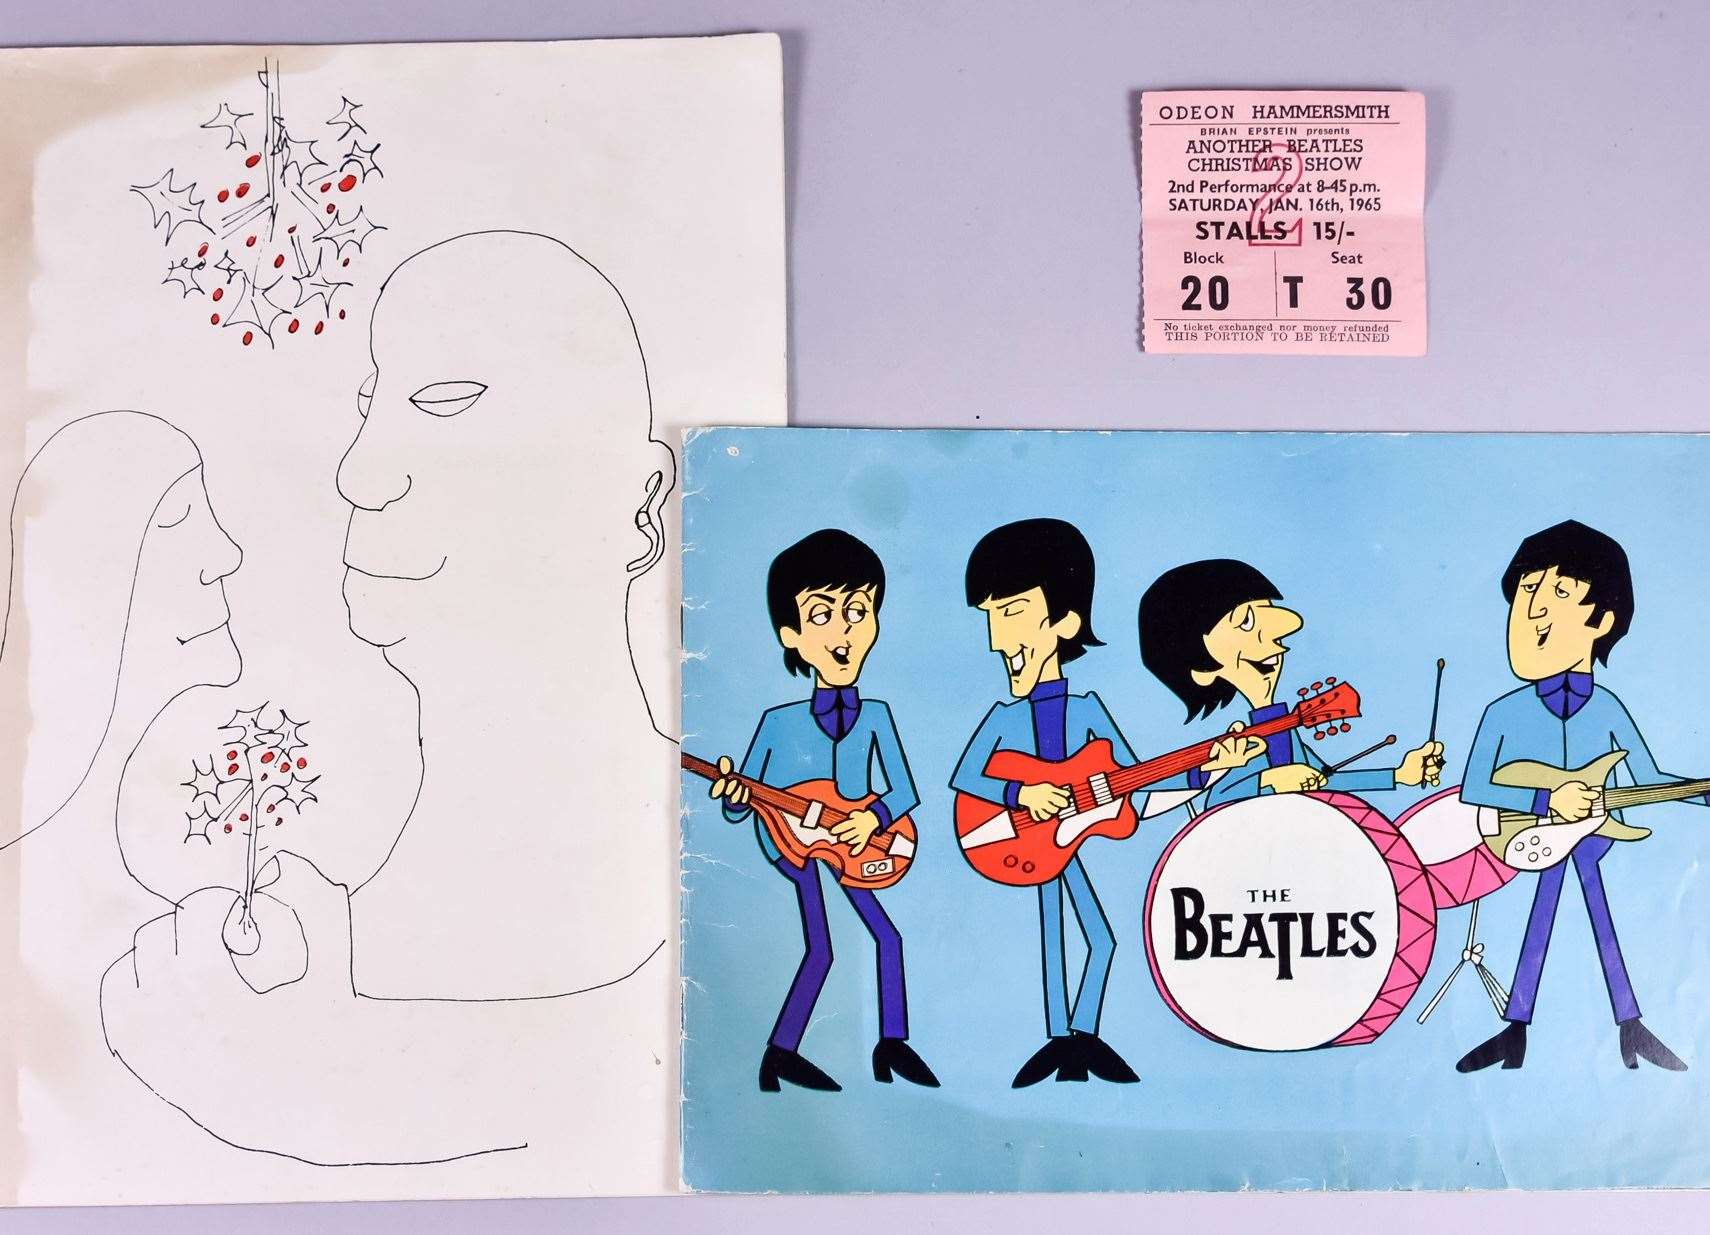 An Odeon Hammersmith ticket to 'Another Beatles Christmas Show', and concert programme with cover designed by John Lennon and 'The Beatles Show' concert programme from 1965 - the final UK tour, estimated at up to £220.